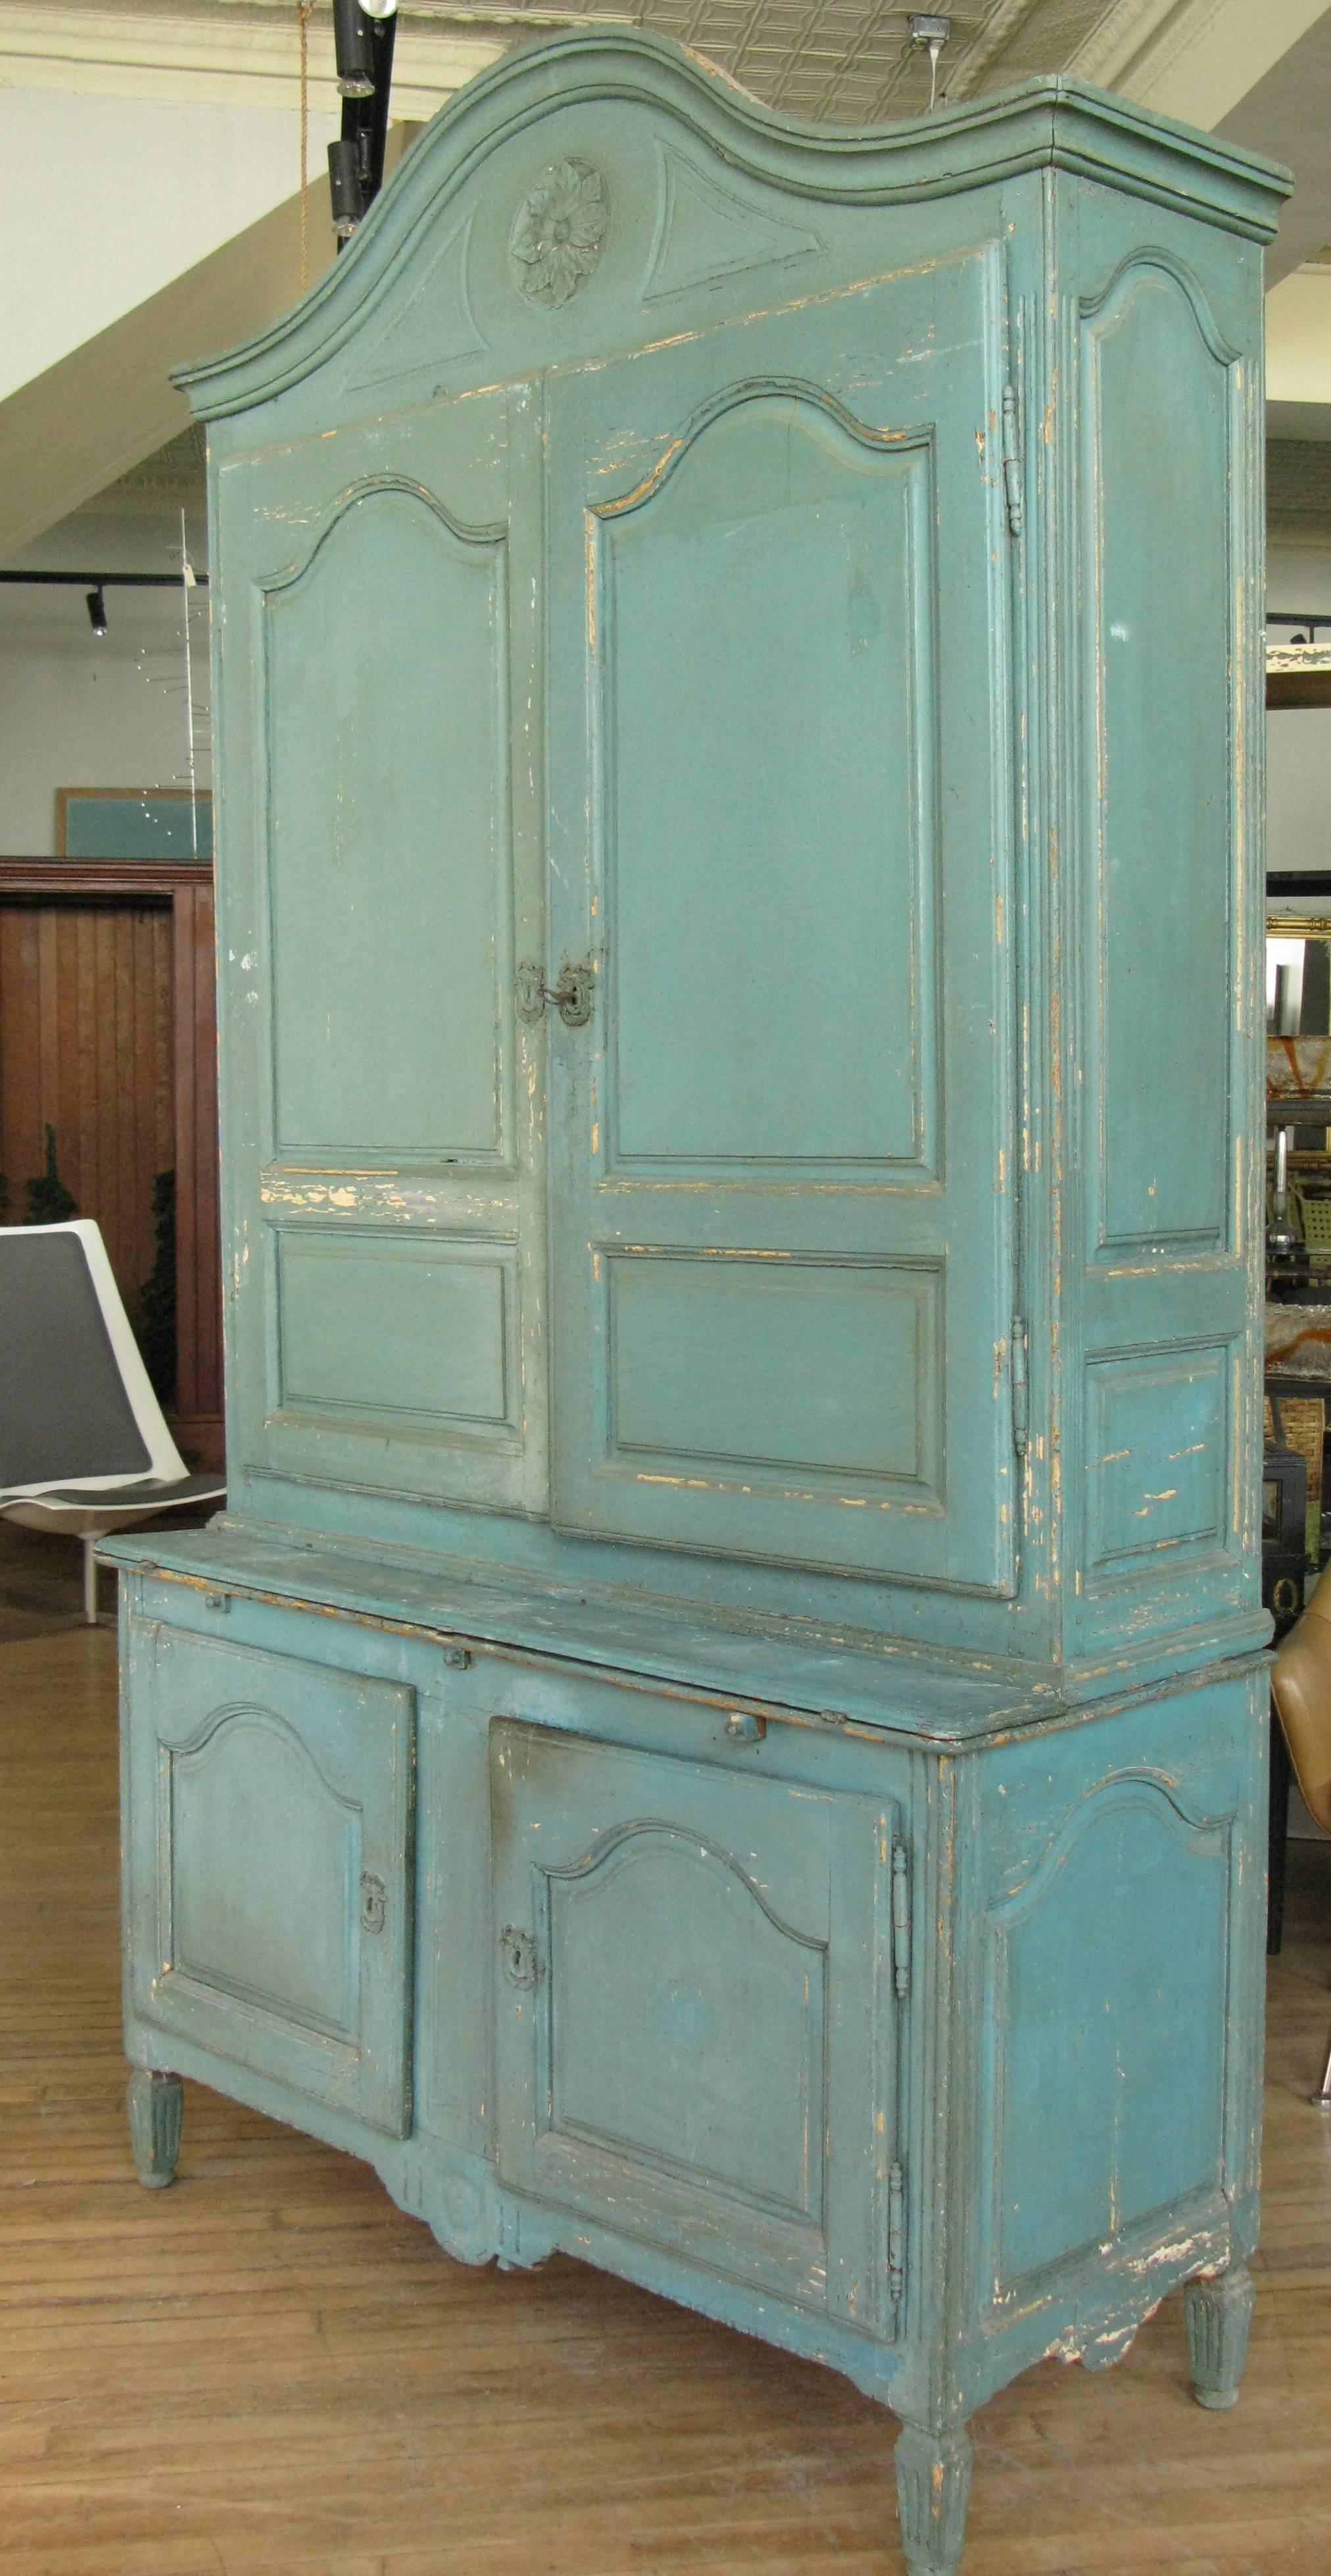 A very charming antique late 19th century cupboard in its original blue/green painted finish. The upper interior fitted with cubbies, and with its original cast iron lock and key. The lower portion with a shelf and a small fold-out desk surface. The